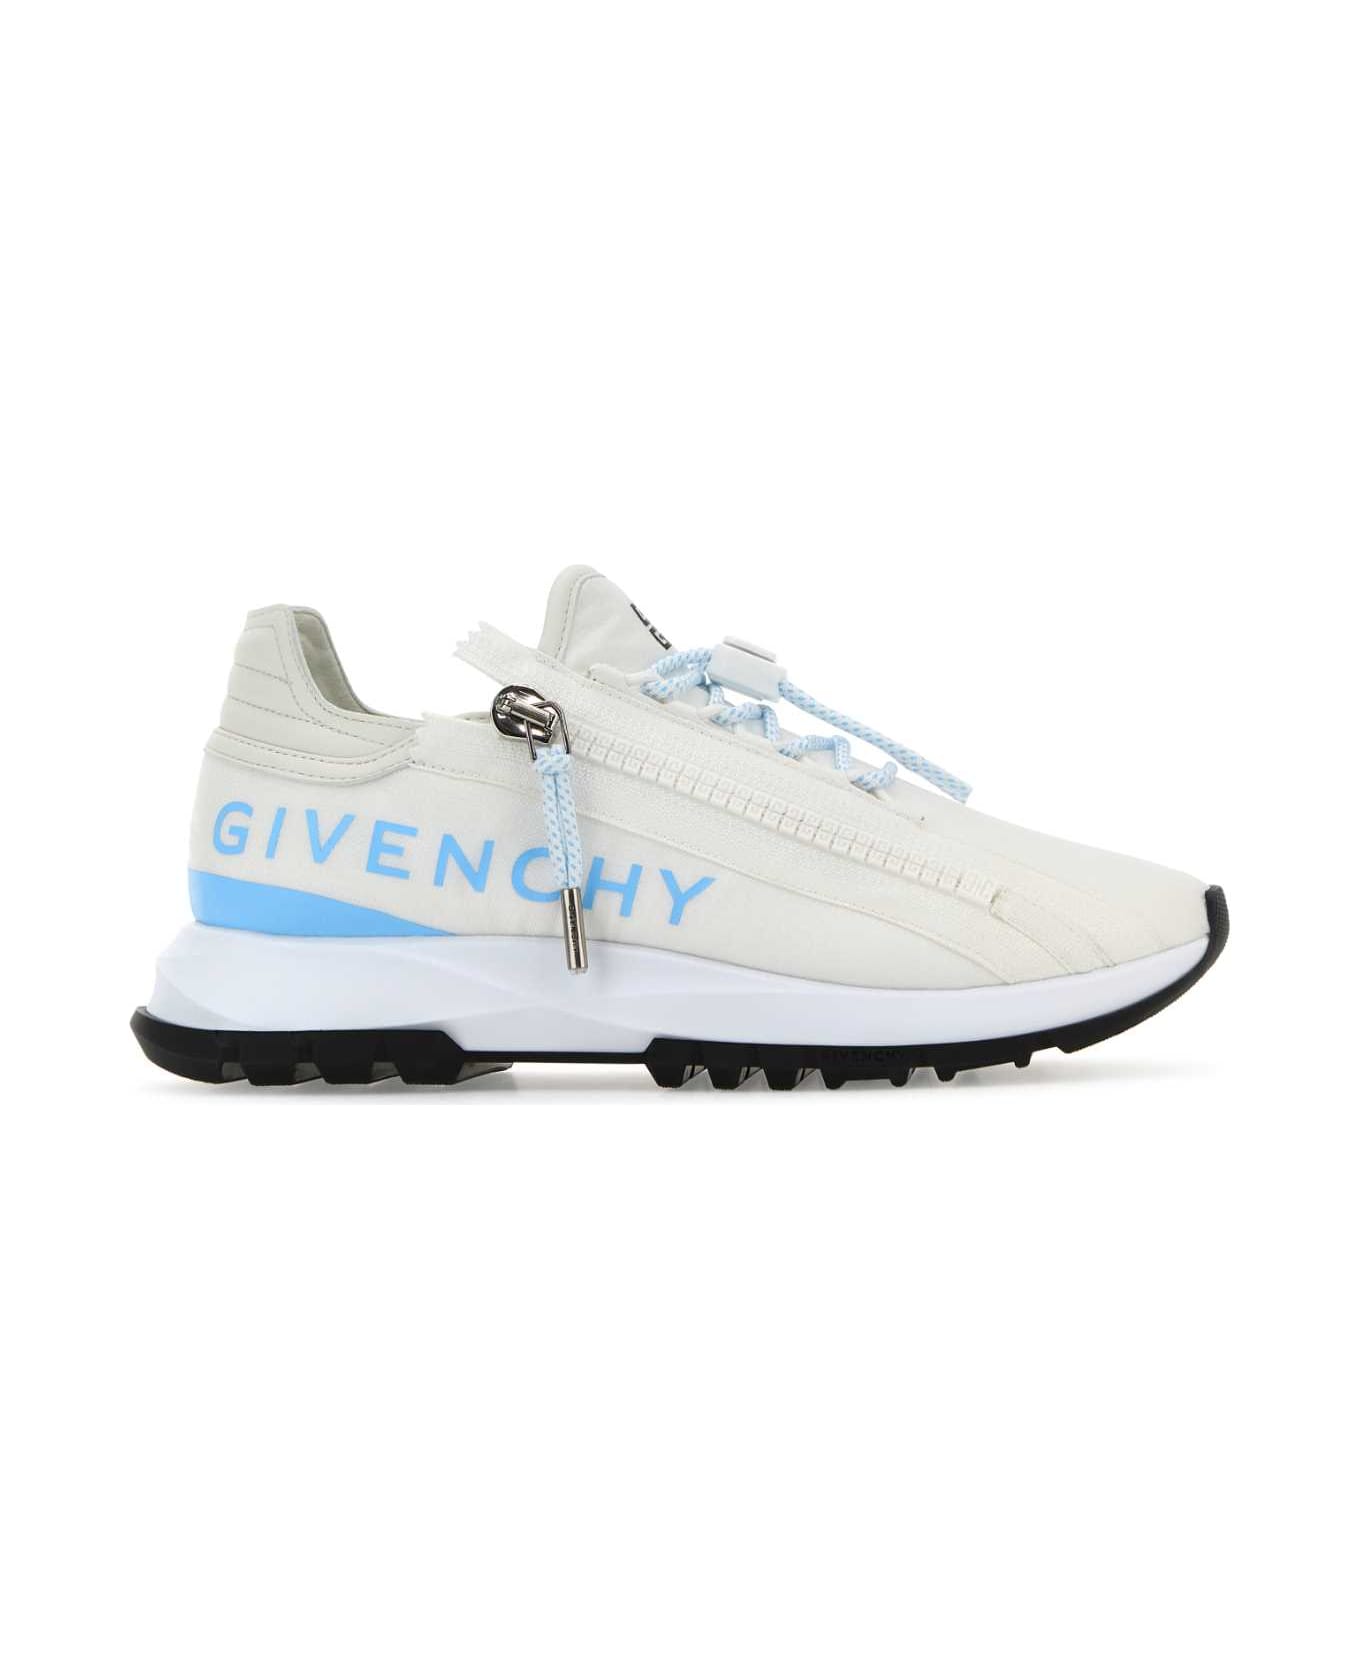 Givenchy White Fabric And Leather Spectre Sneakers - WHITEBLUE